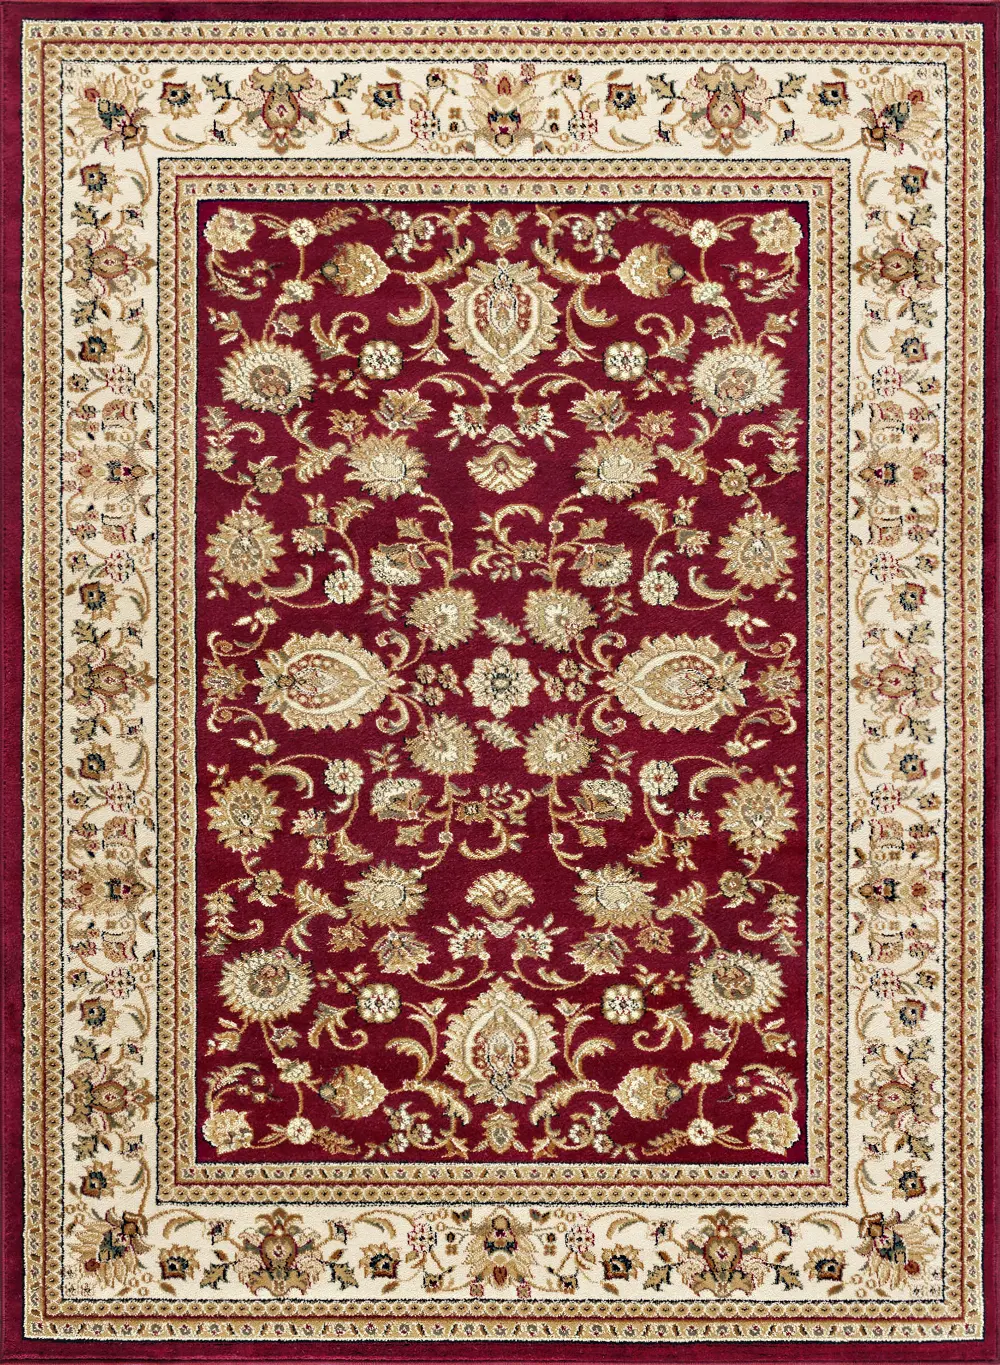 SNS47208x11 8 x 10 Large Red and Beige Area Rug - Sensation-1